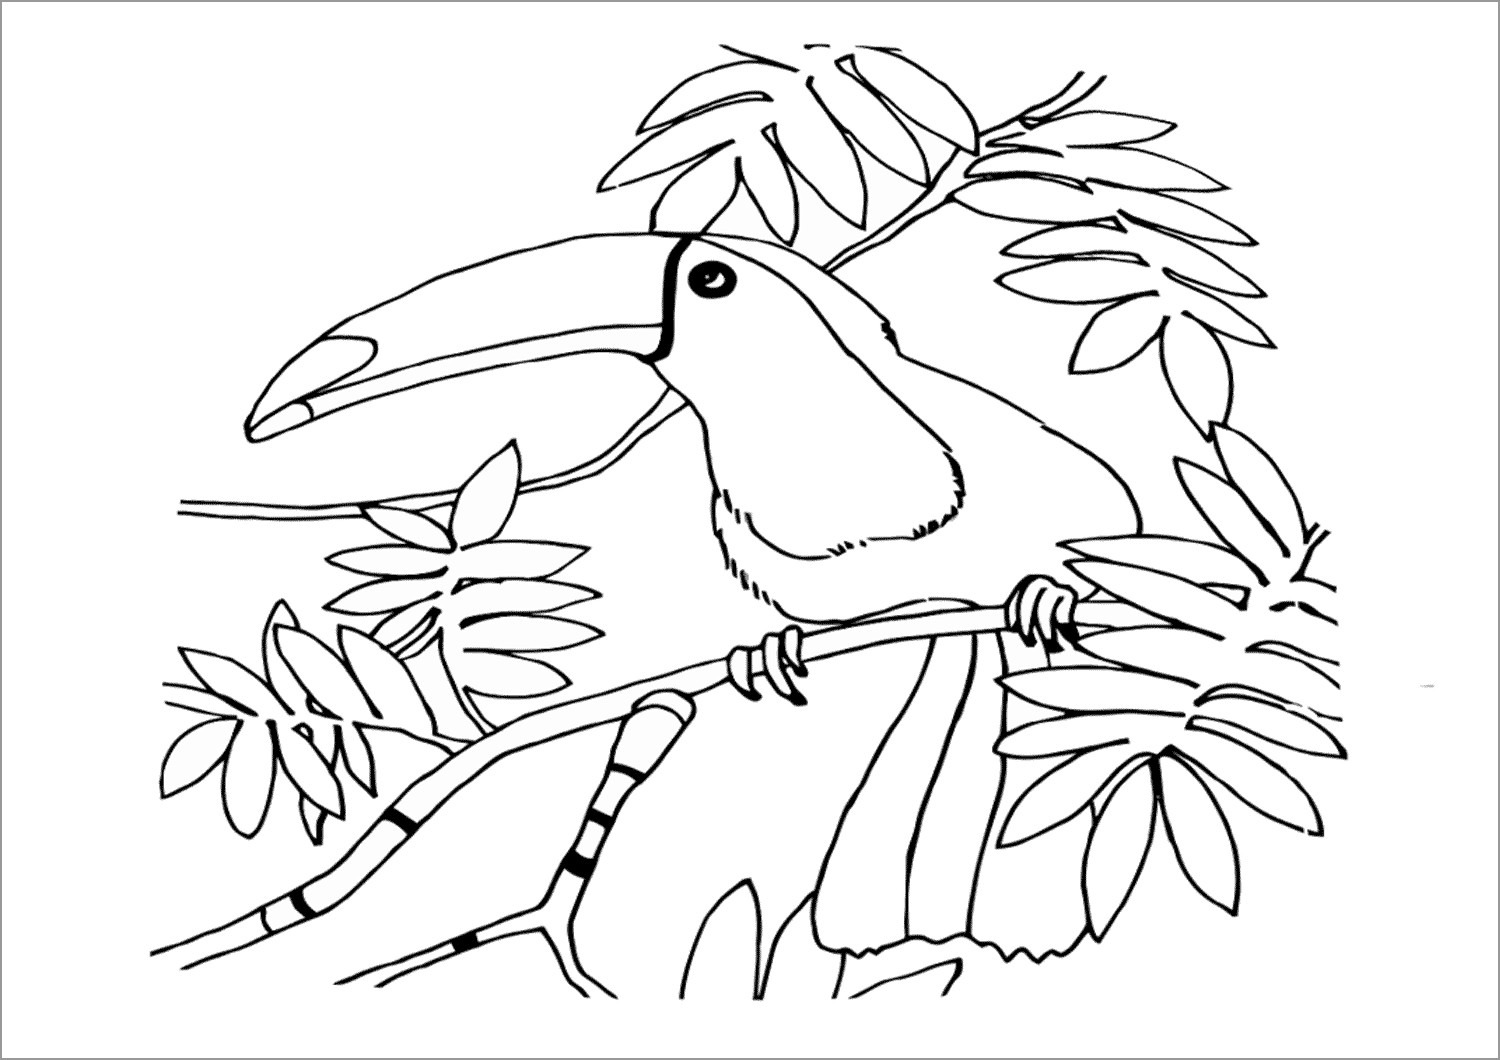 Toucan Coloring Pages to Print